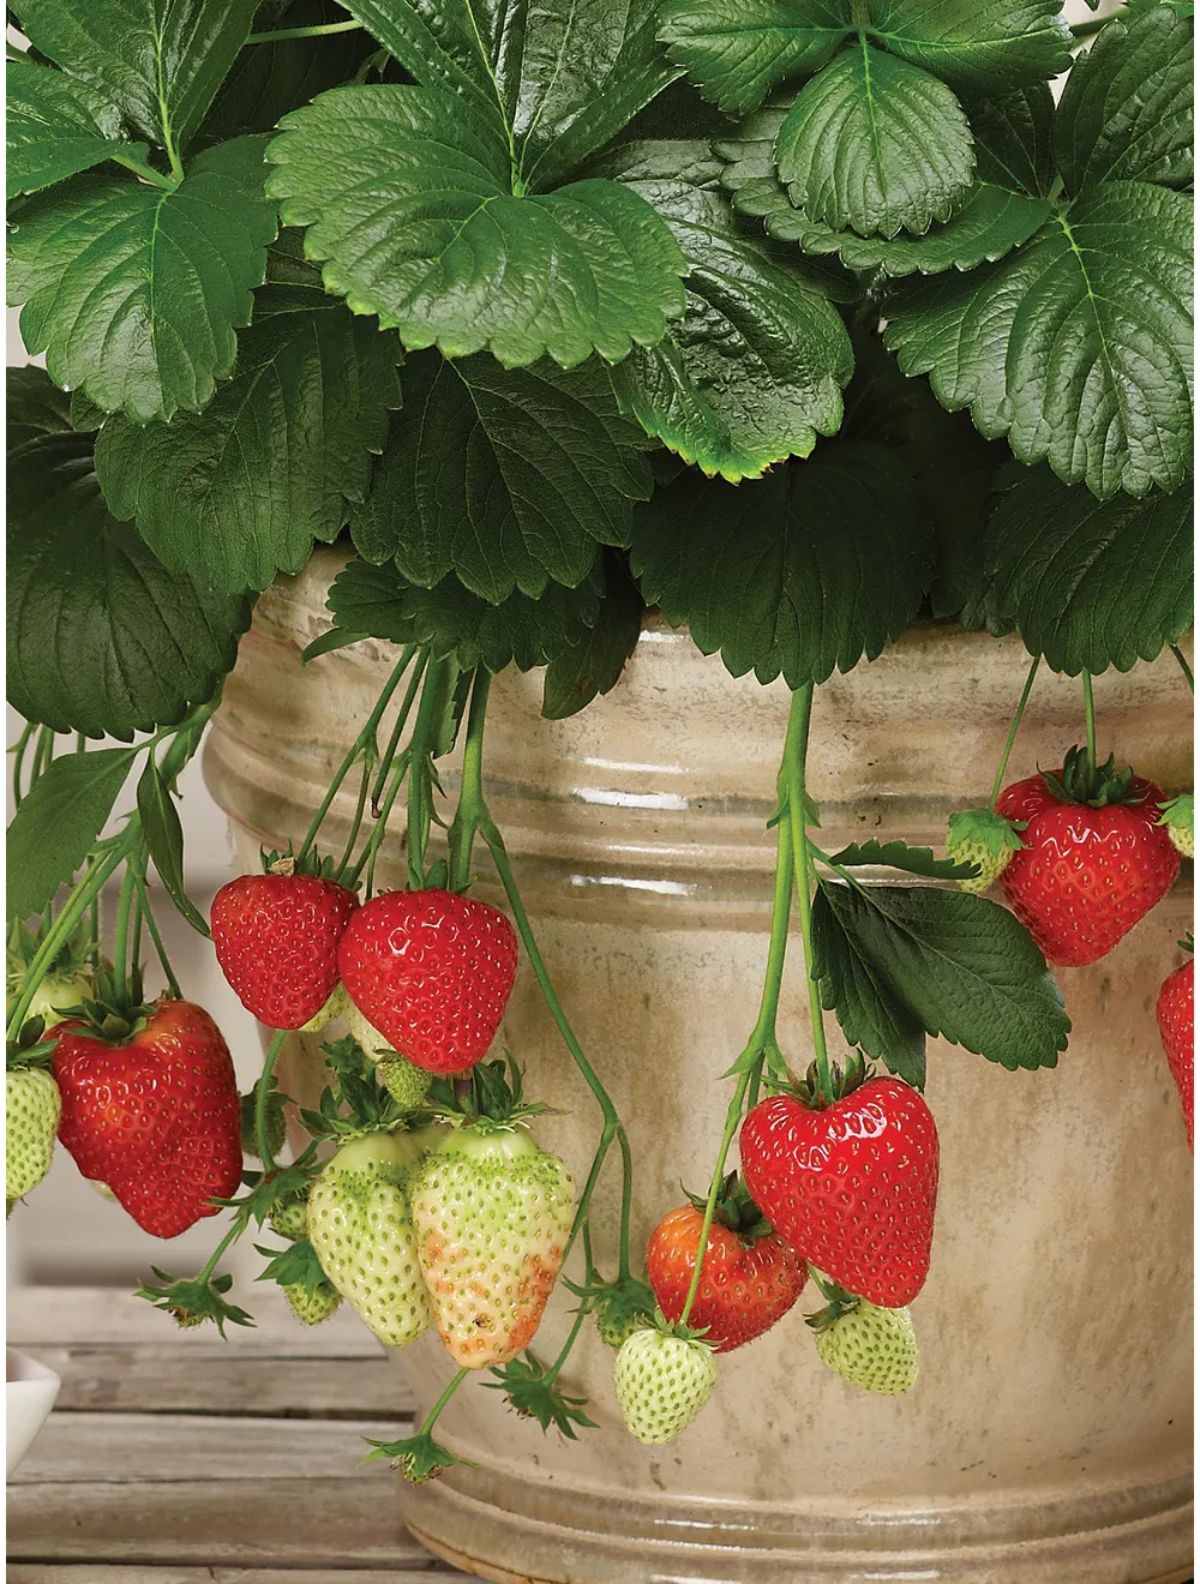 Montana strawberry variety plant with ripe fruits growing in a pot.